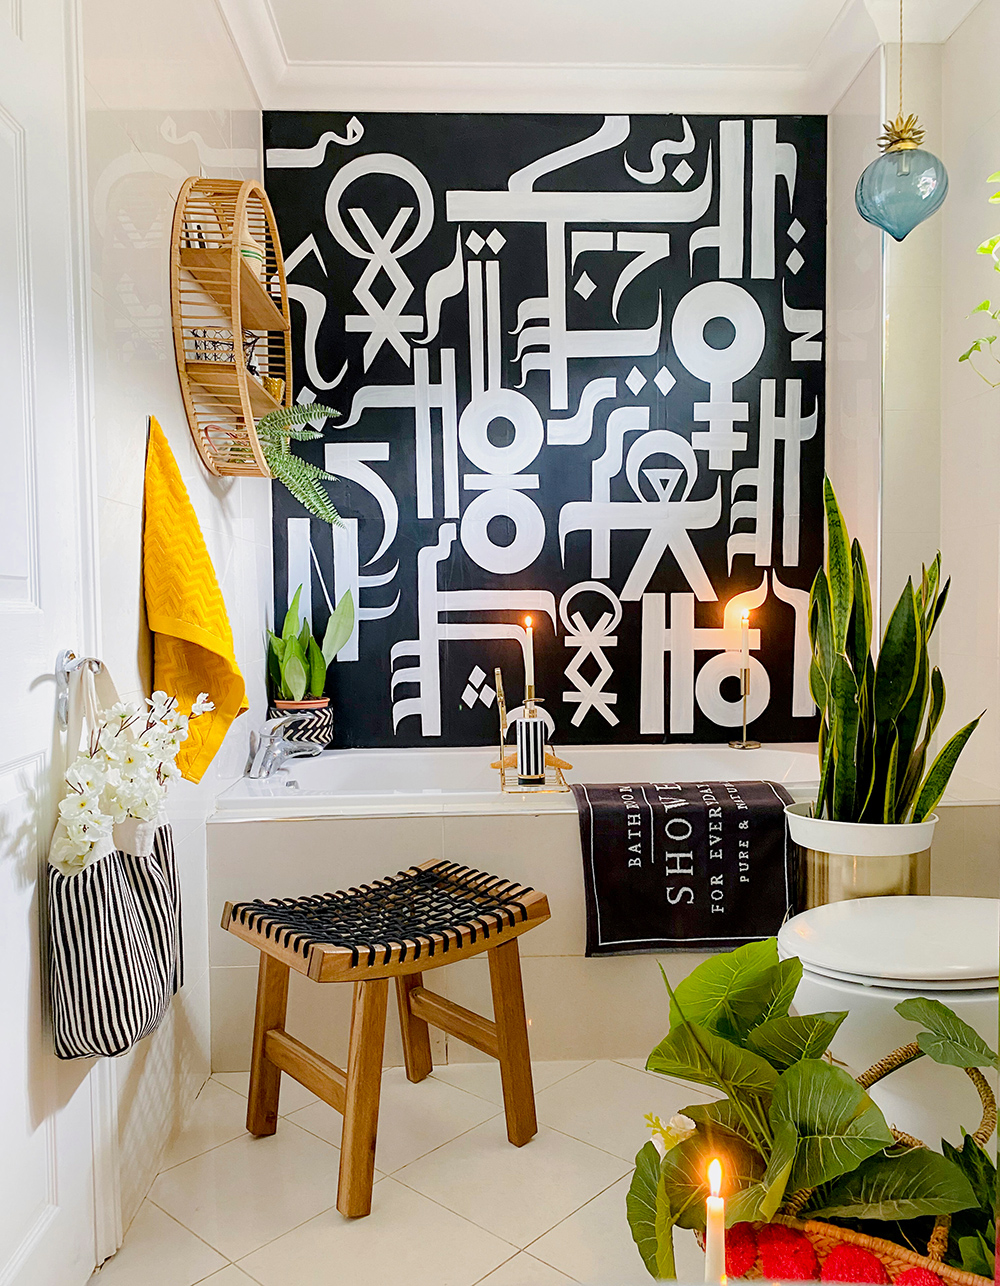 Monochrome bathroom inspiration with pops of yellow, luscious house plants and quirky wall mural